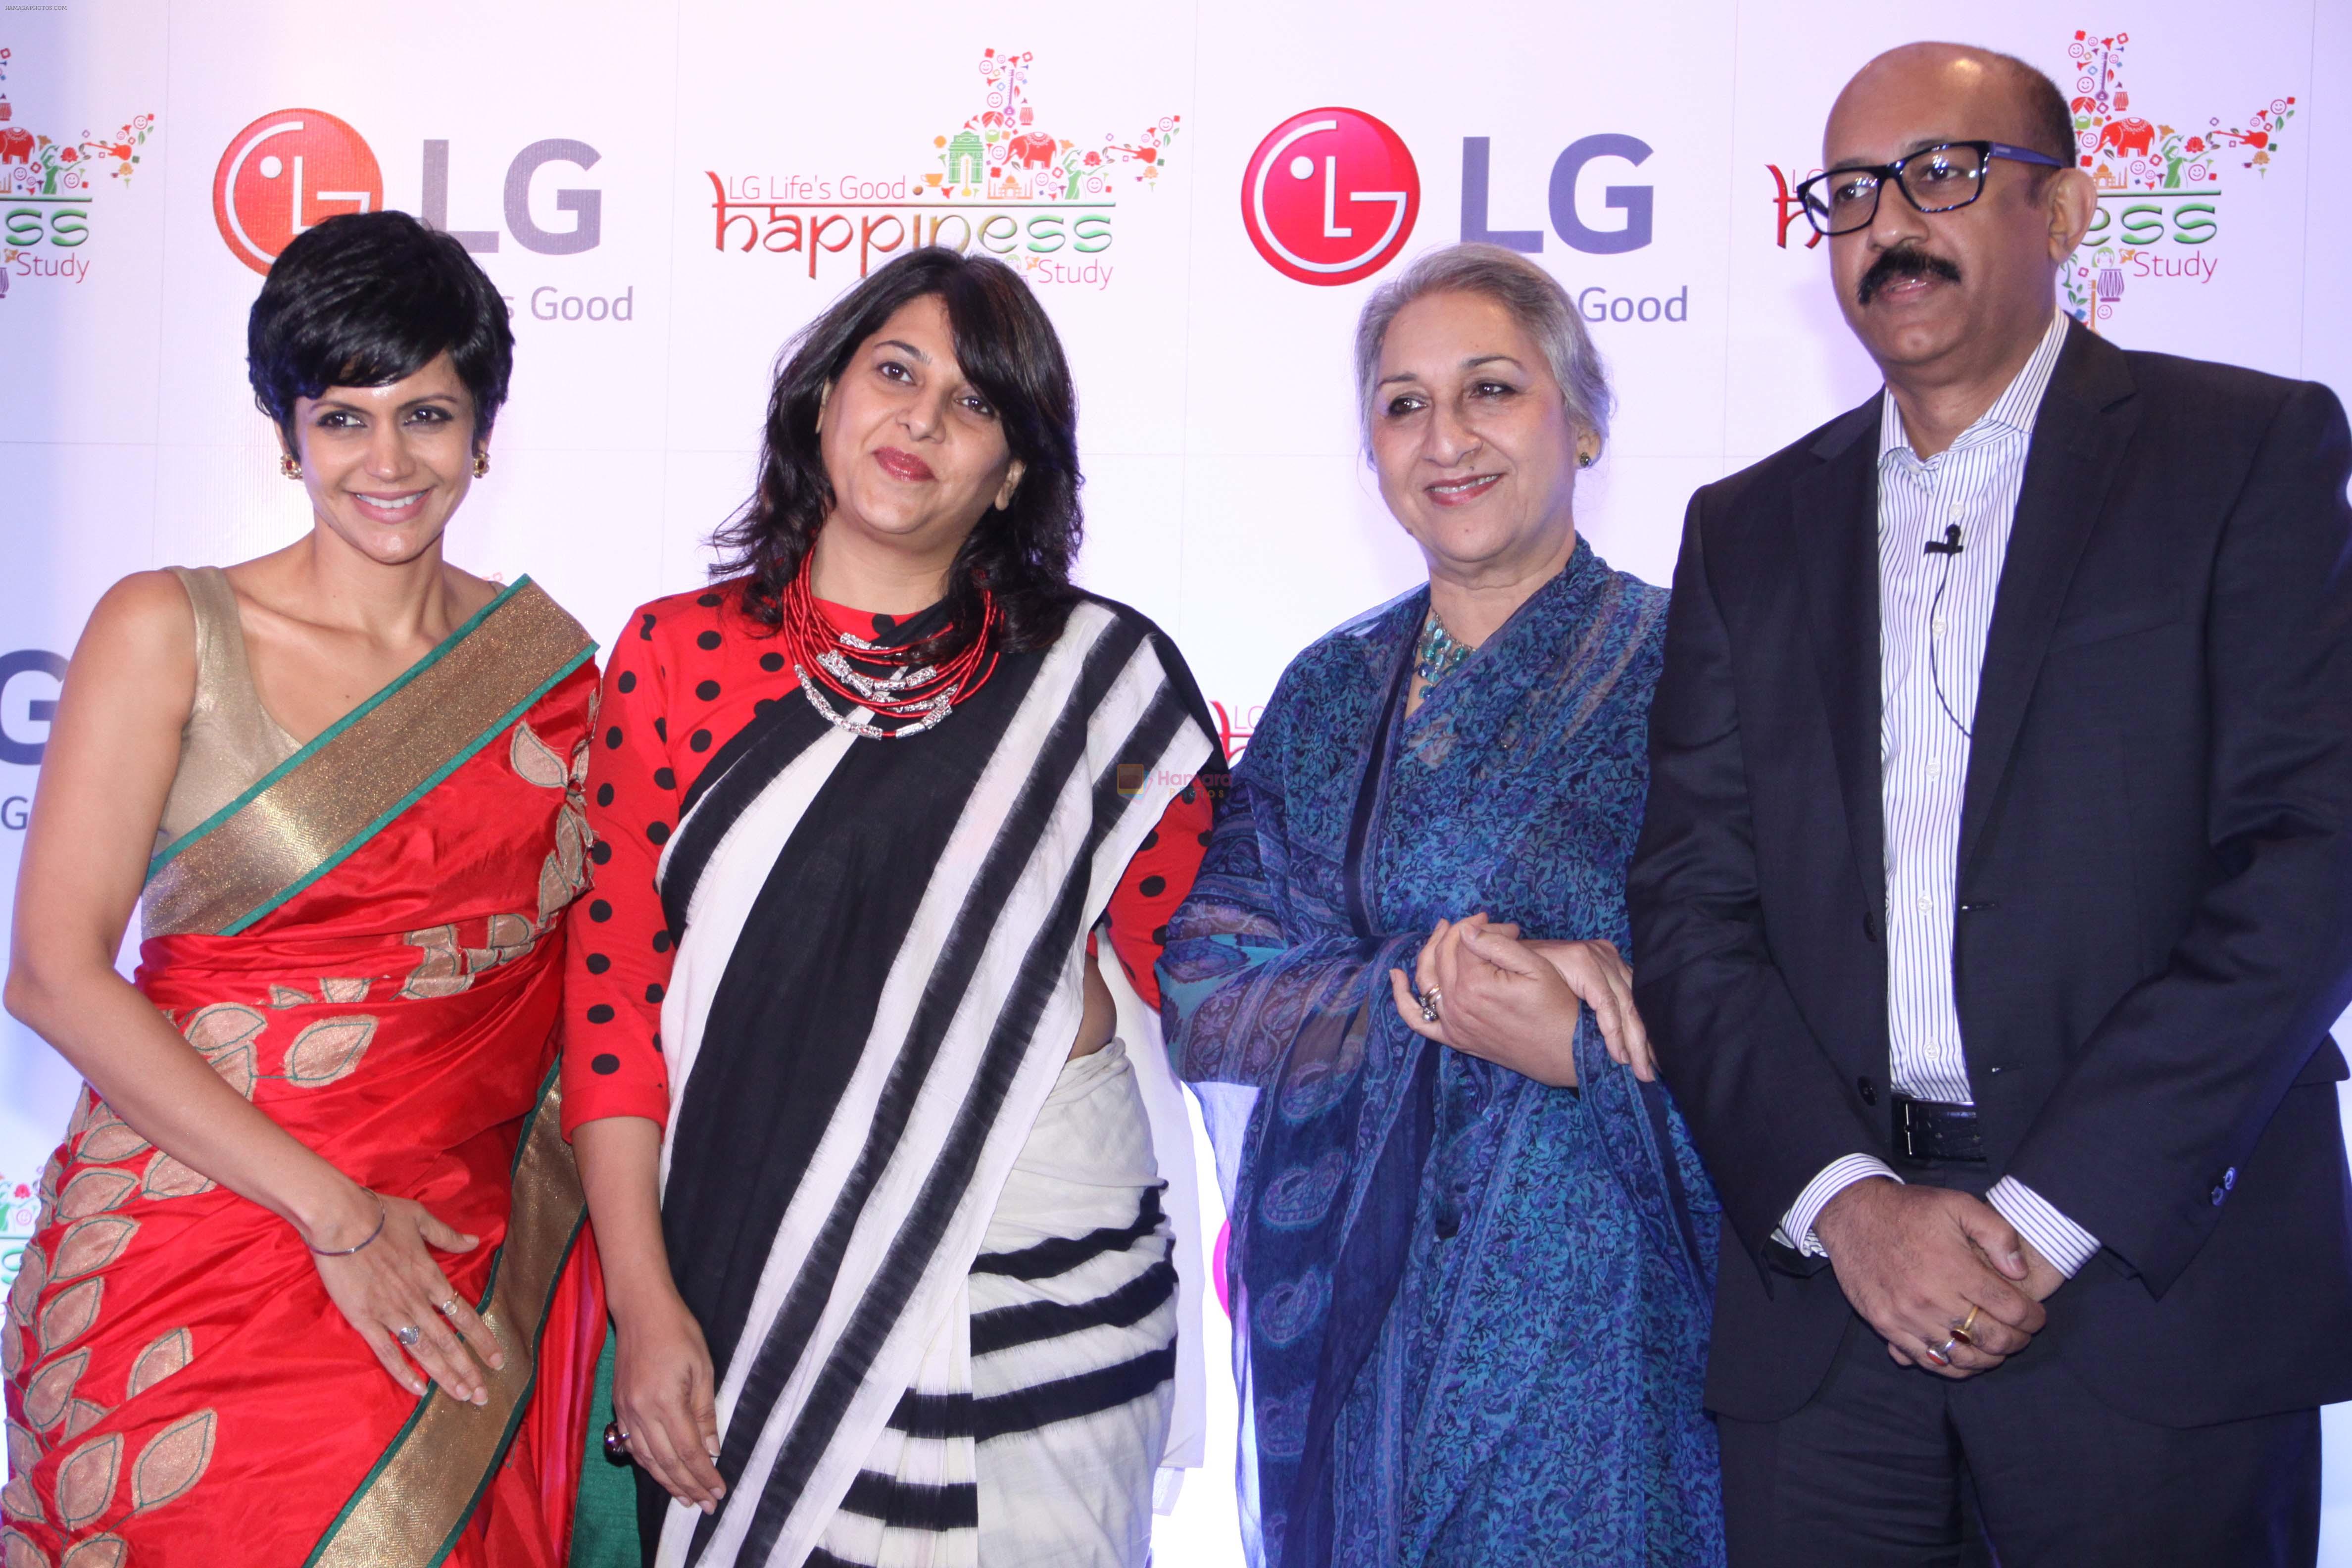 Mandira Bedi during the release of LG Life is Good Happiness Study report in New Delhi, India on June 11, 2015